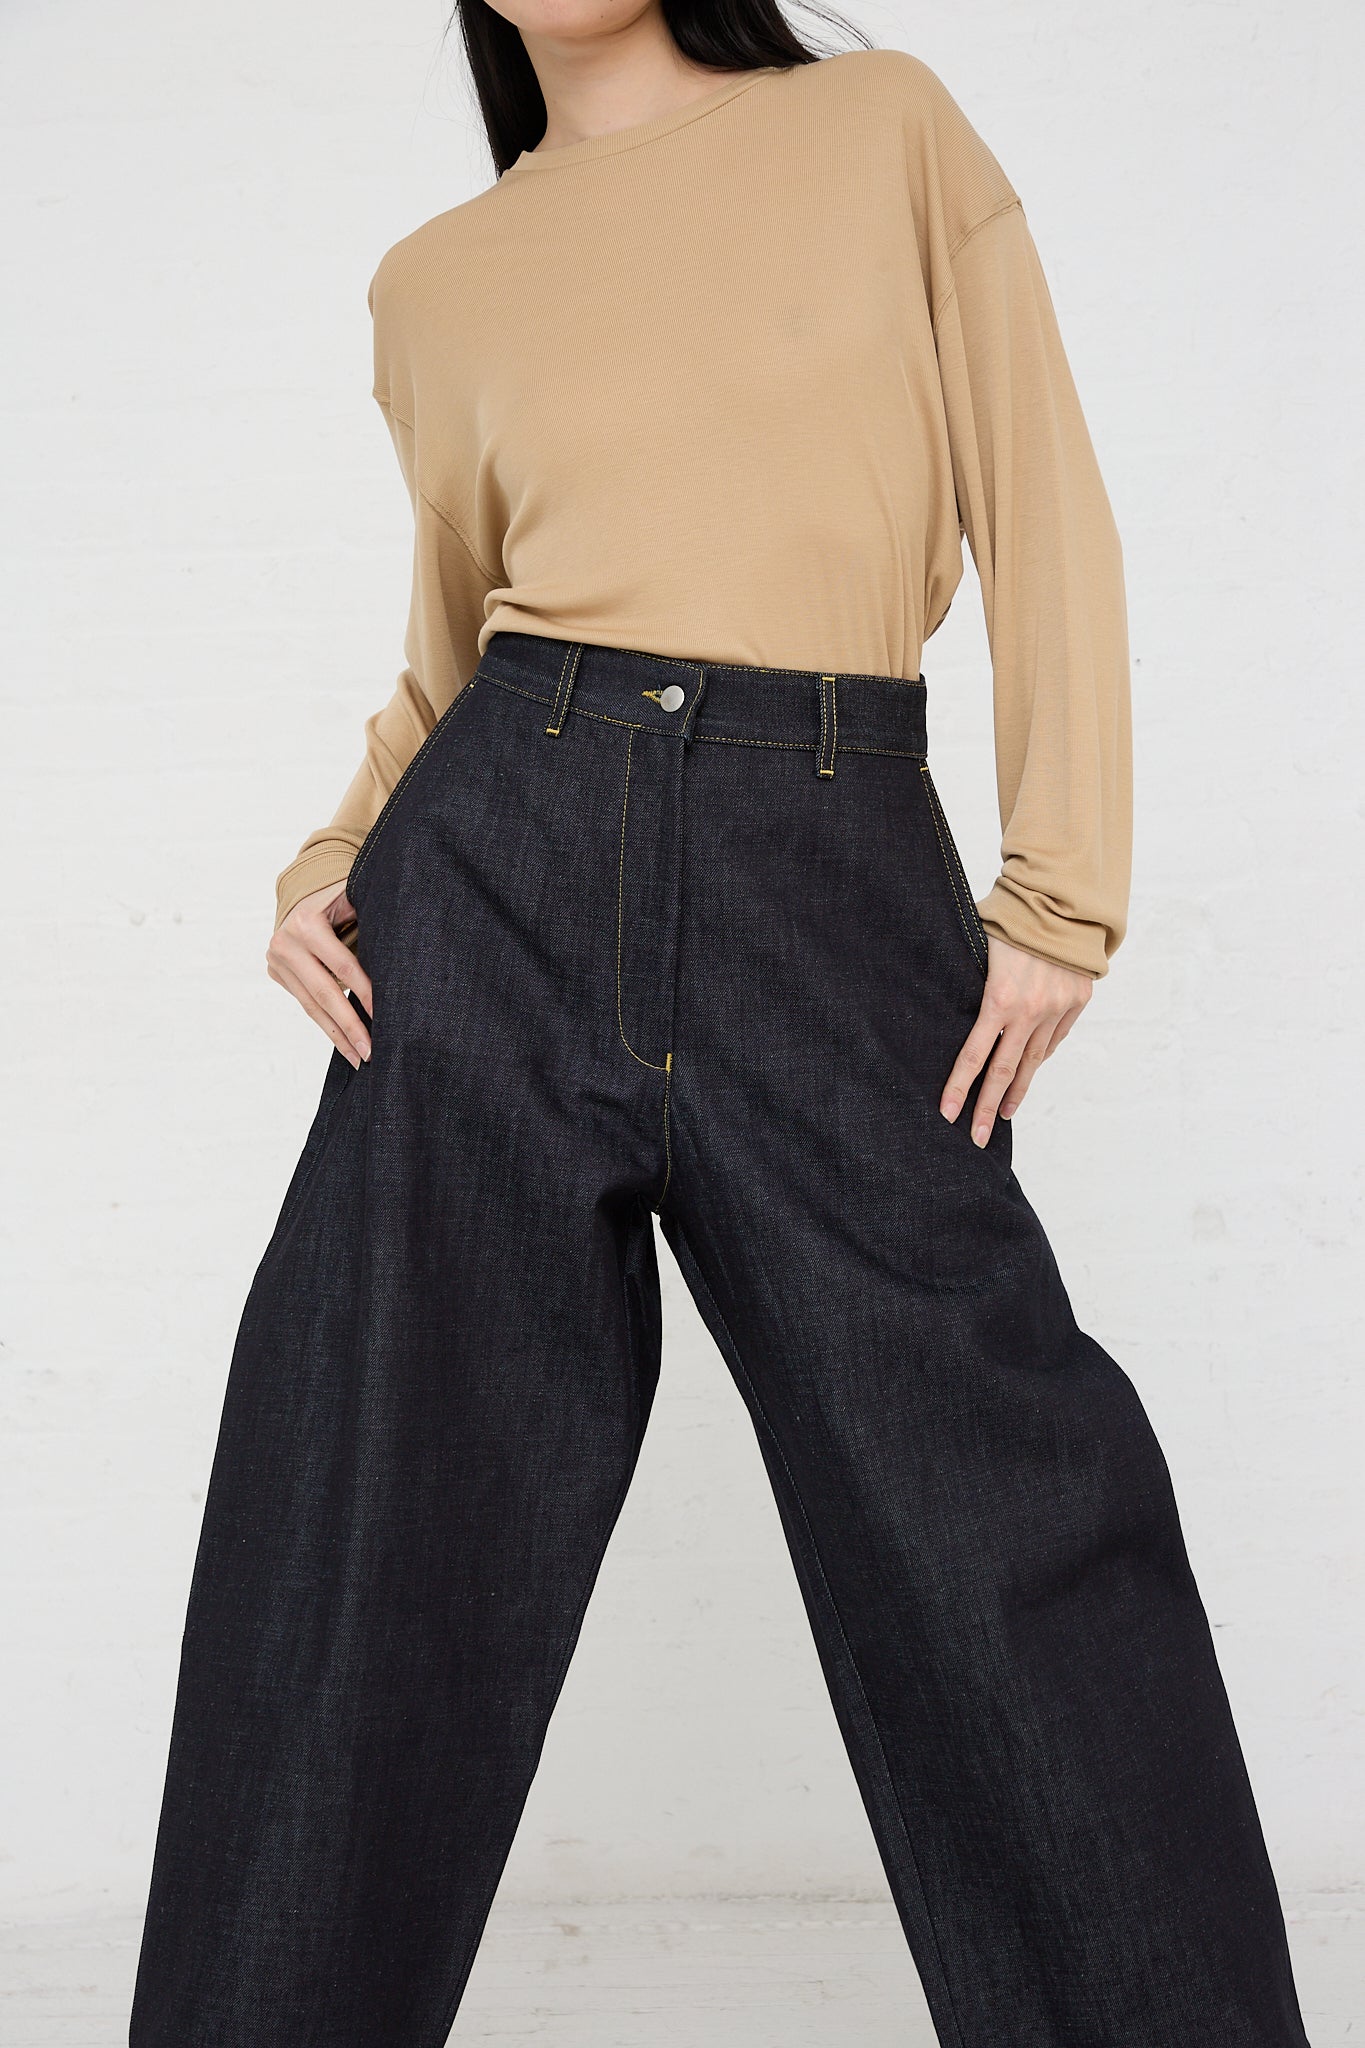 The model is wearing a beige tee and Studio Nicholson's Chalco Wide Crop Jean in Raw Indigo with an oversized fit.